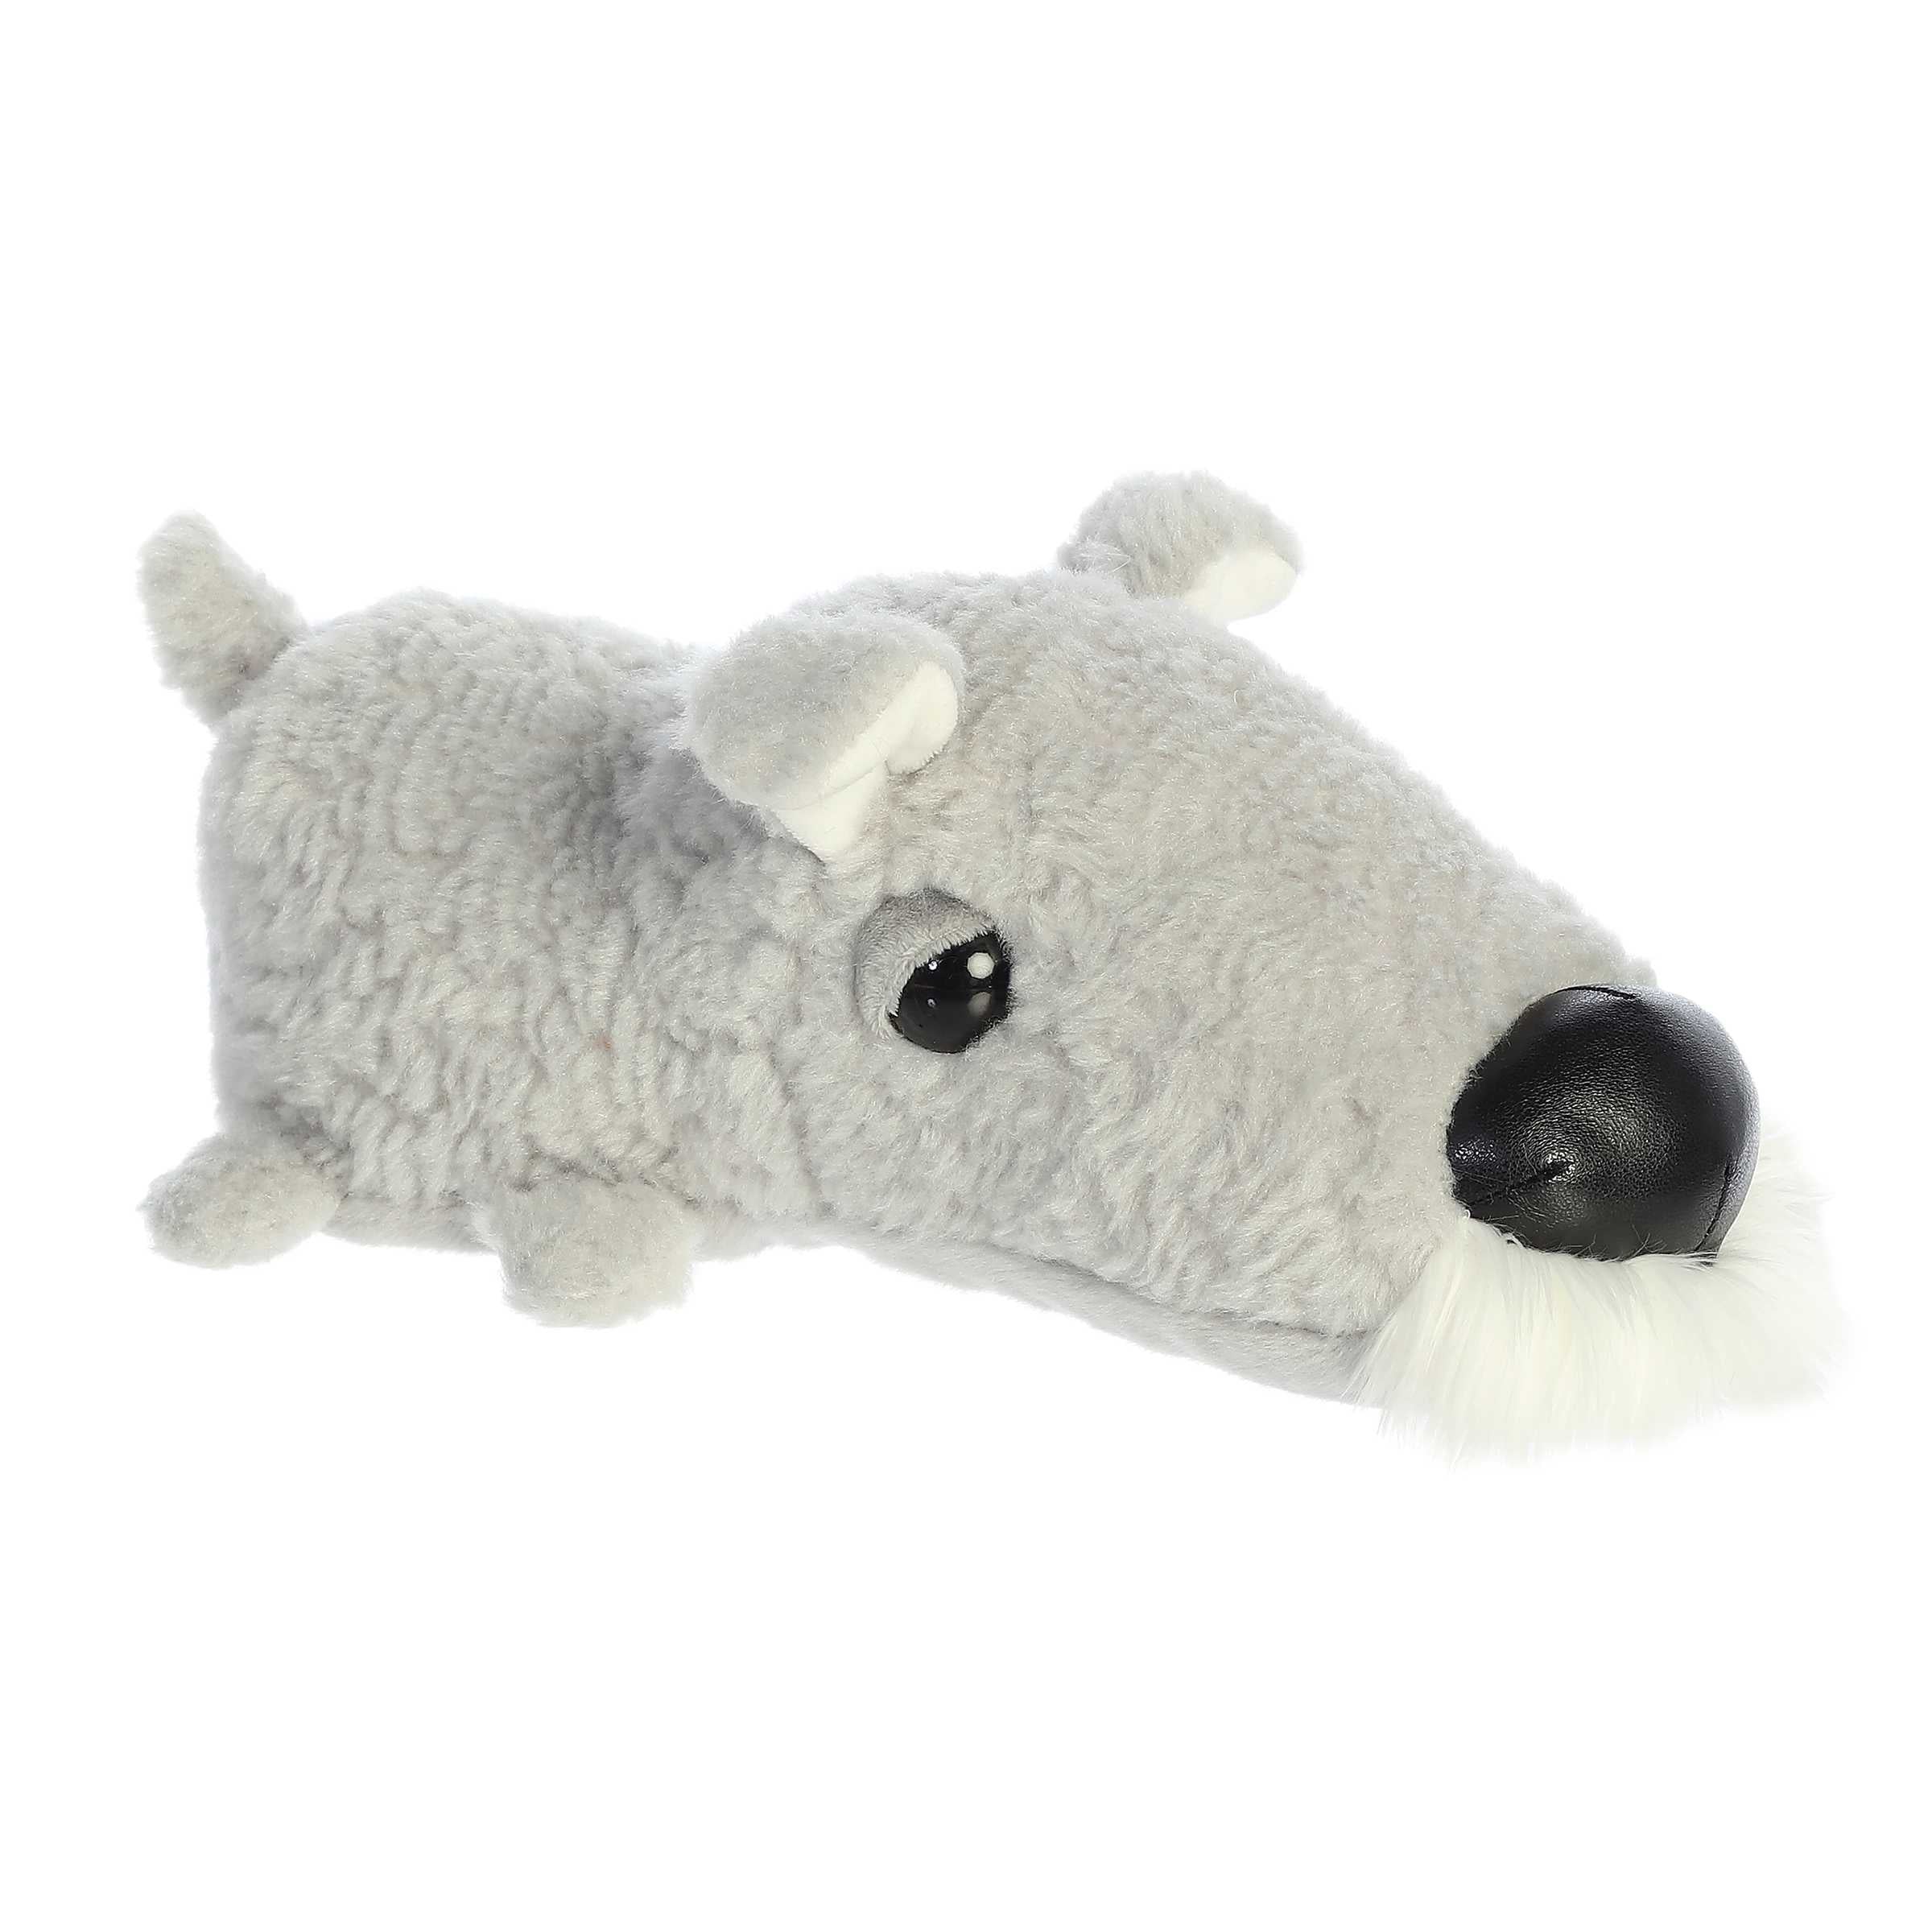 Sinclair Schnauzer from Schnozzles, a plush with a playful snout and gray fur